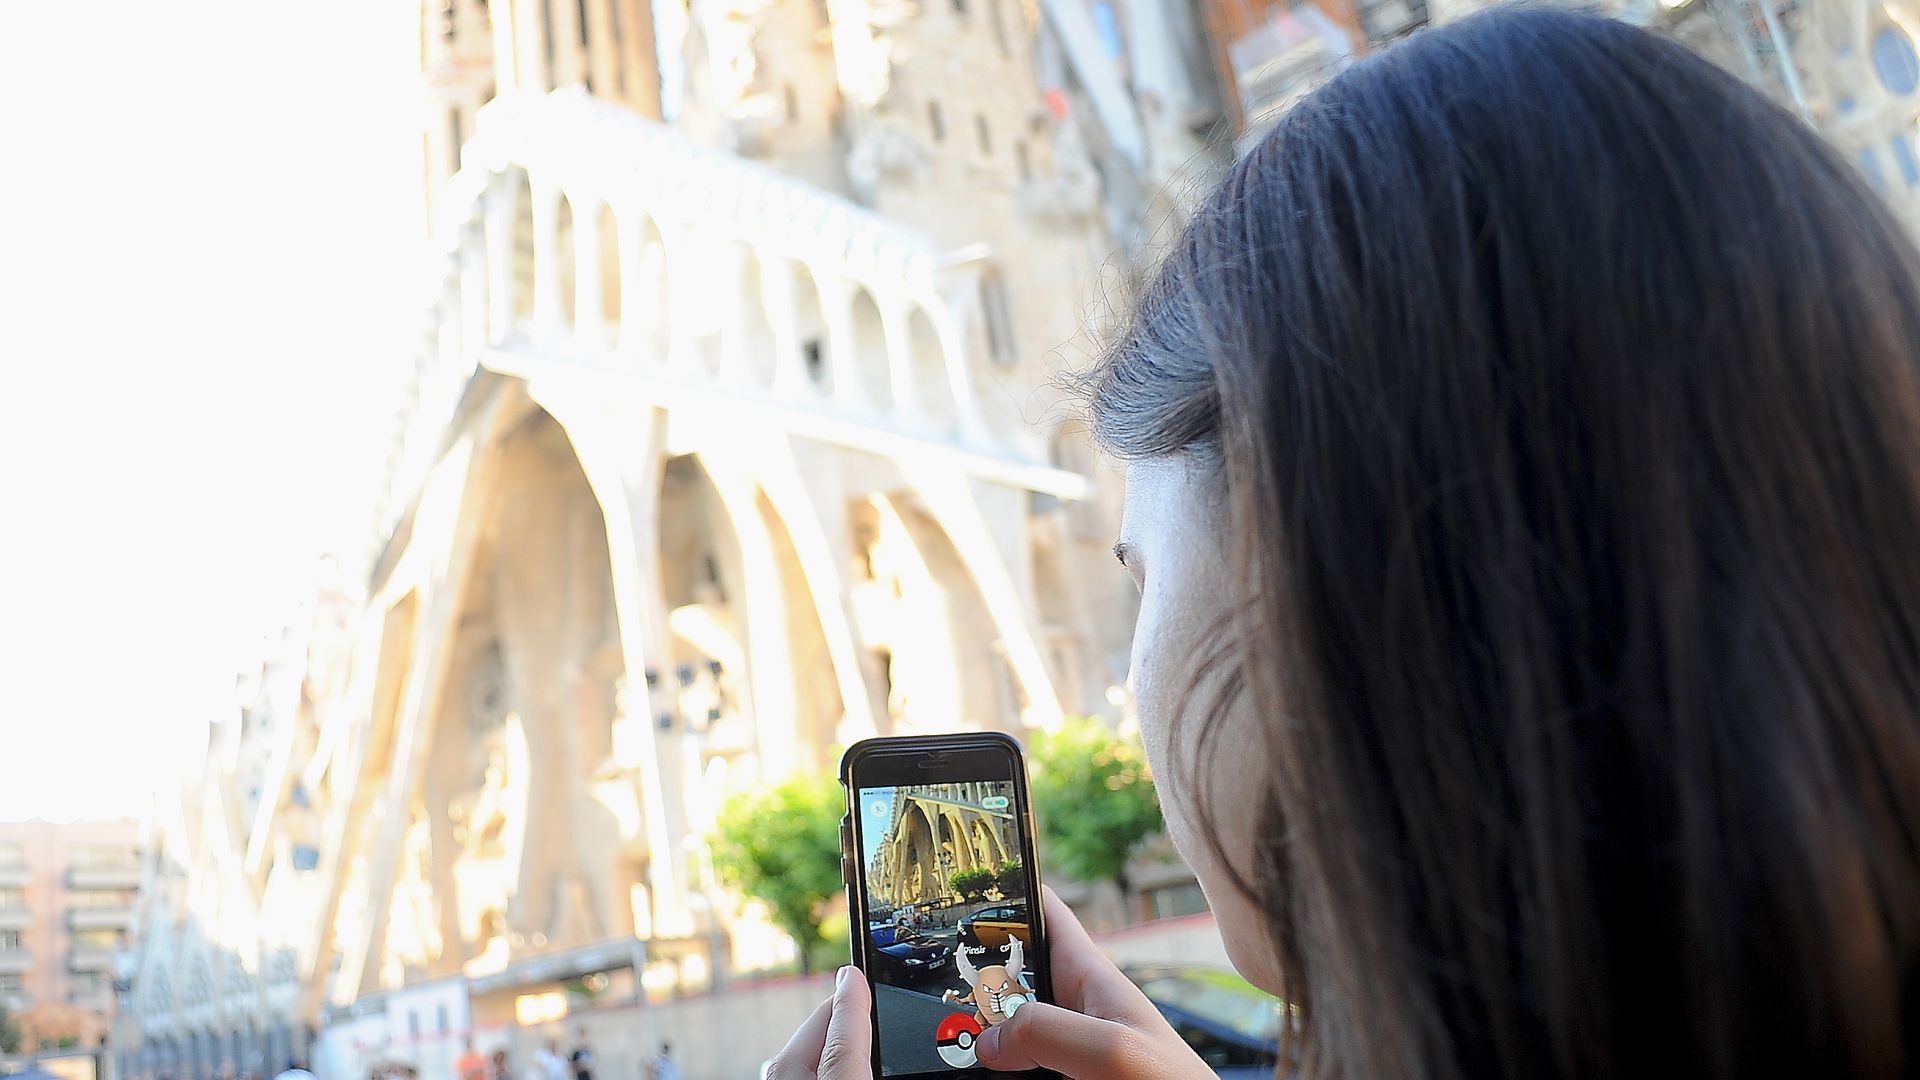 young woman plays Pokemon GO in front of Sagrada Familia, on July 15, 2016 in Barcelona